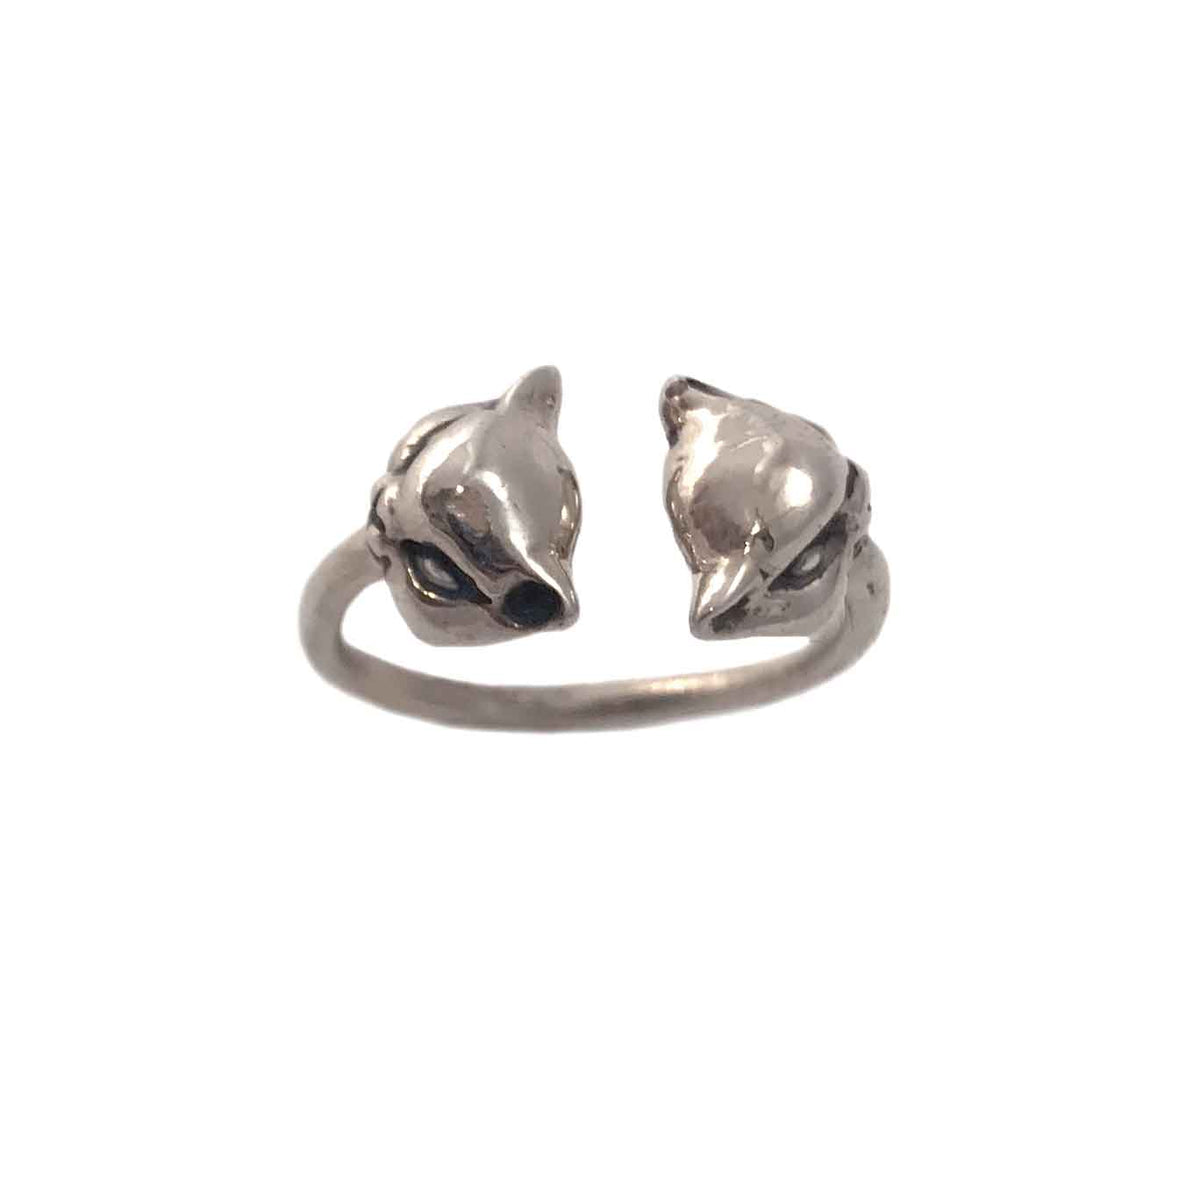 Cat Ring - Silver or Gold Tone